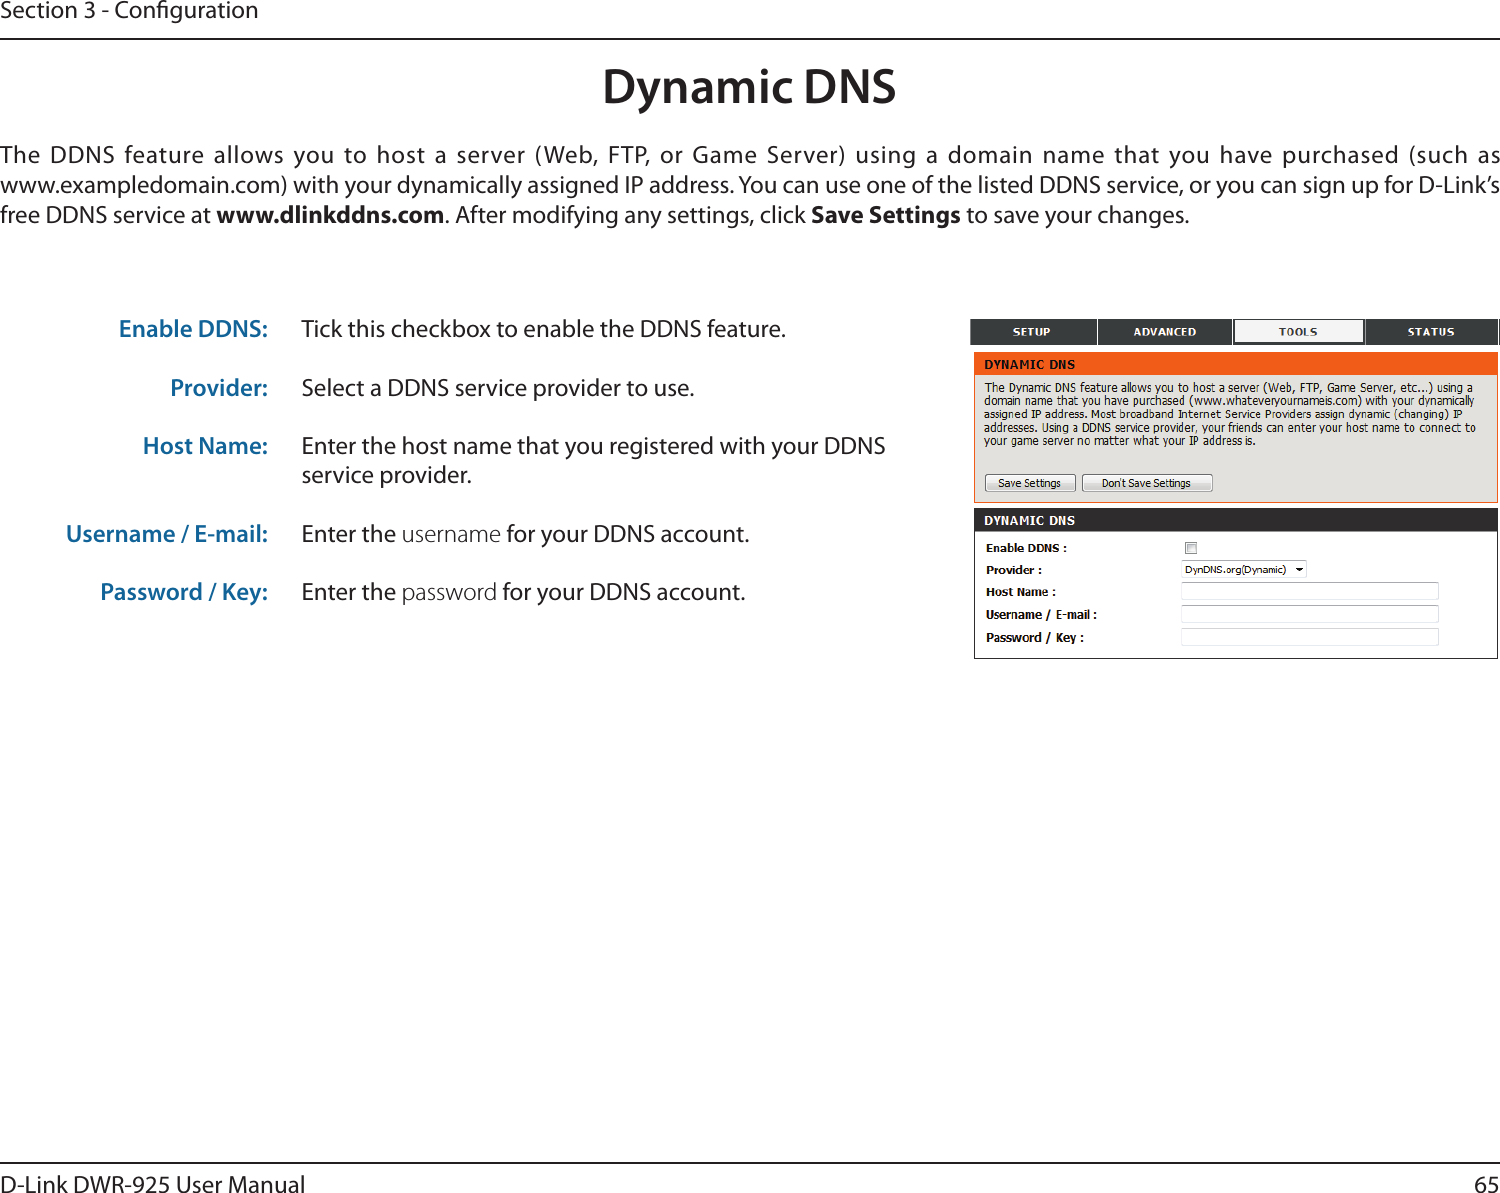 65D-Link DWR-925 User ManualSection 3 - CongurationDynamic DNSTick this checkbox to enable the DDNS feature.Select a DDNS service provider to use.Enter the host name that you registered with your DDNS service provider.Enter the username for your DDNS account.Enter the password for your DDNS account.The DDNS feature allows you to host a server (Web, FTP, or Game Server) using a domain name that you have purchased (such as  www.exampledomain.com) with your dynamically assigned IP address. You can use one of the listed DDNS service, or you can sign up for D-Link’s free DDNS service at www.dlinkddns.com. After modifying any settings, click Save Settings to save your changes.Enable DDNS:Provider: Host Name:Username / E-mail: Password / Key: